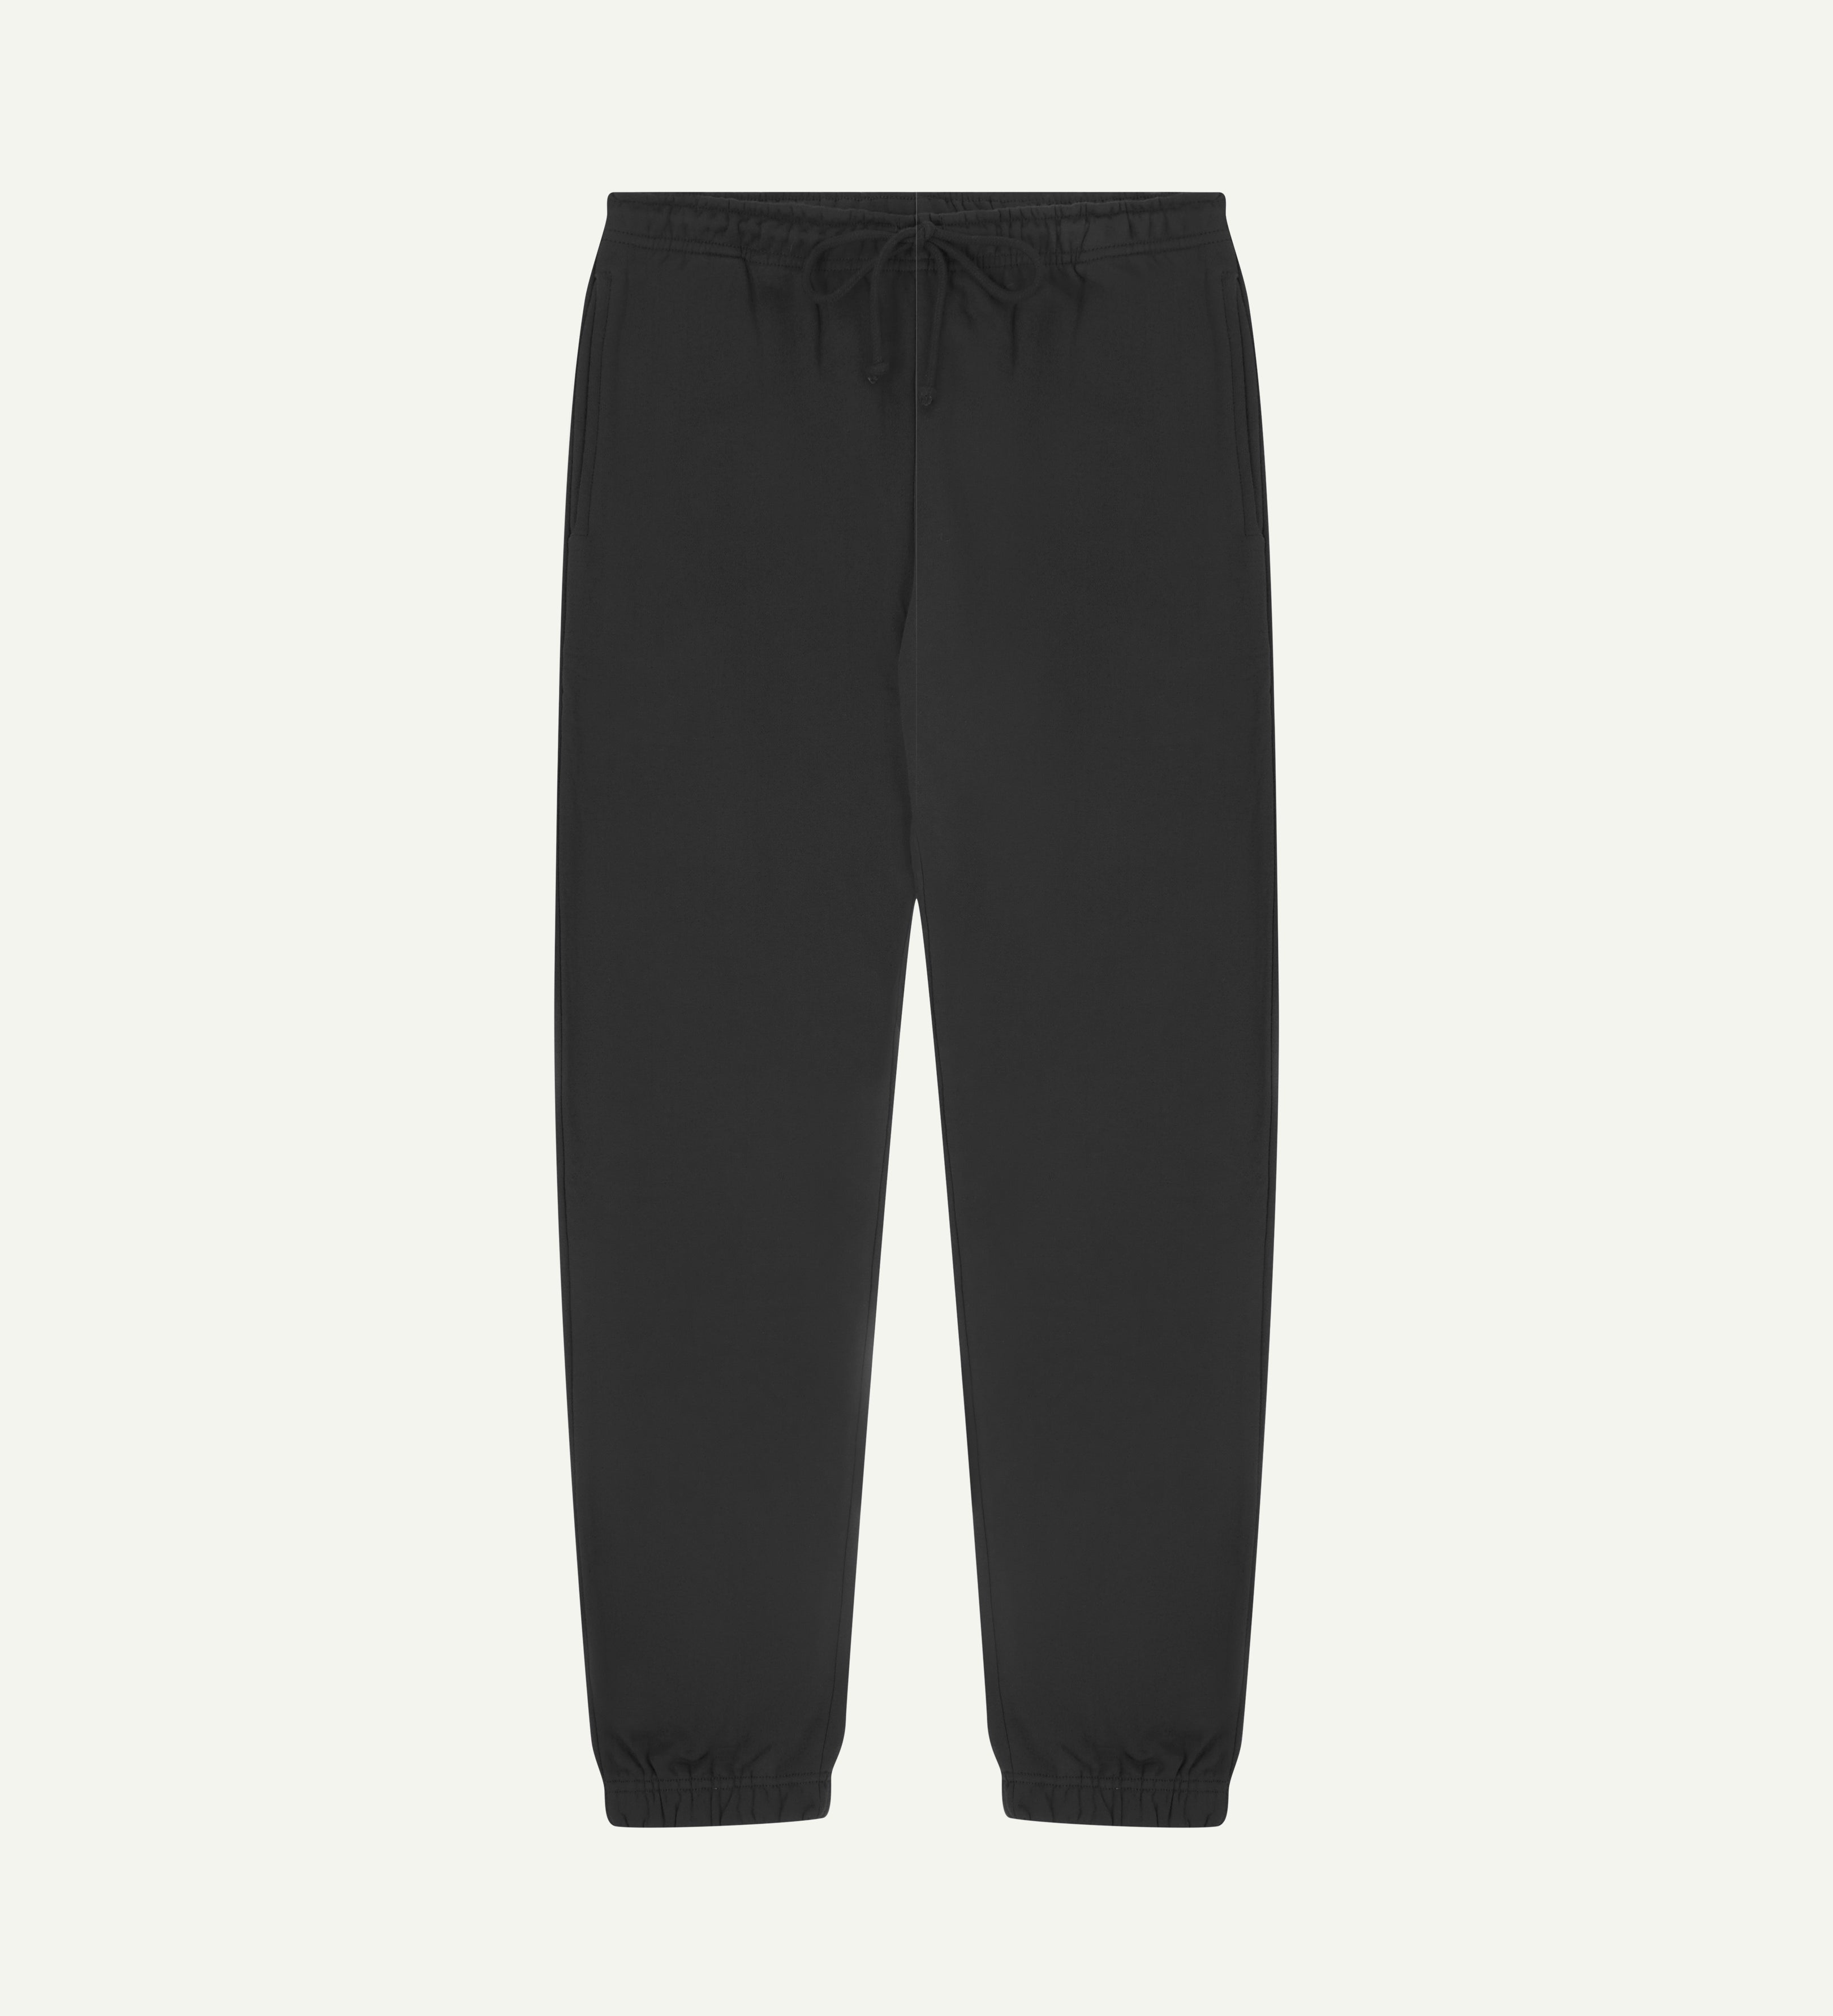 Front view of dark grey organic cotton Jogging Pants for men by Uskees.